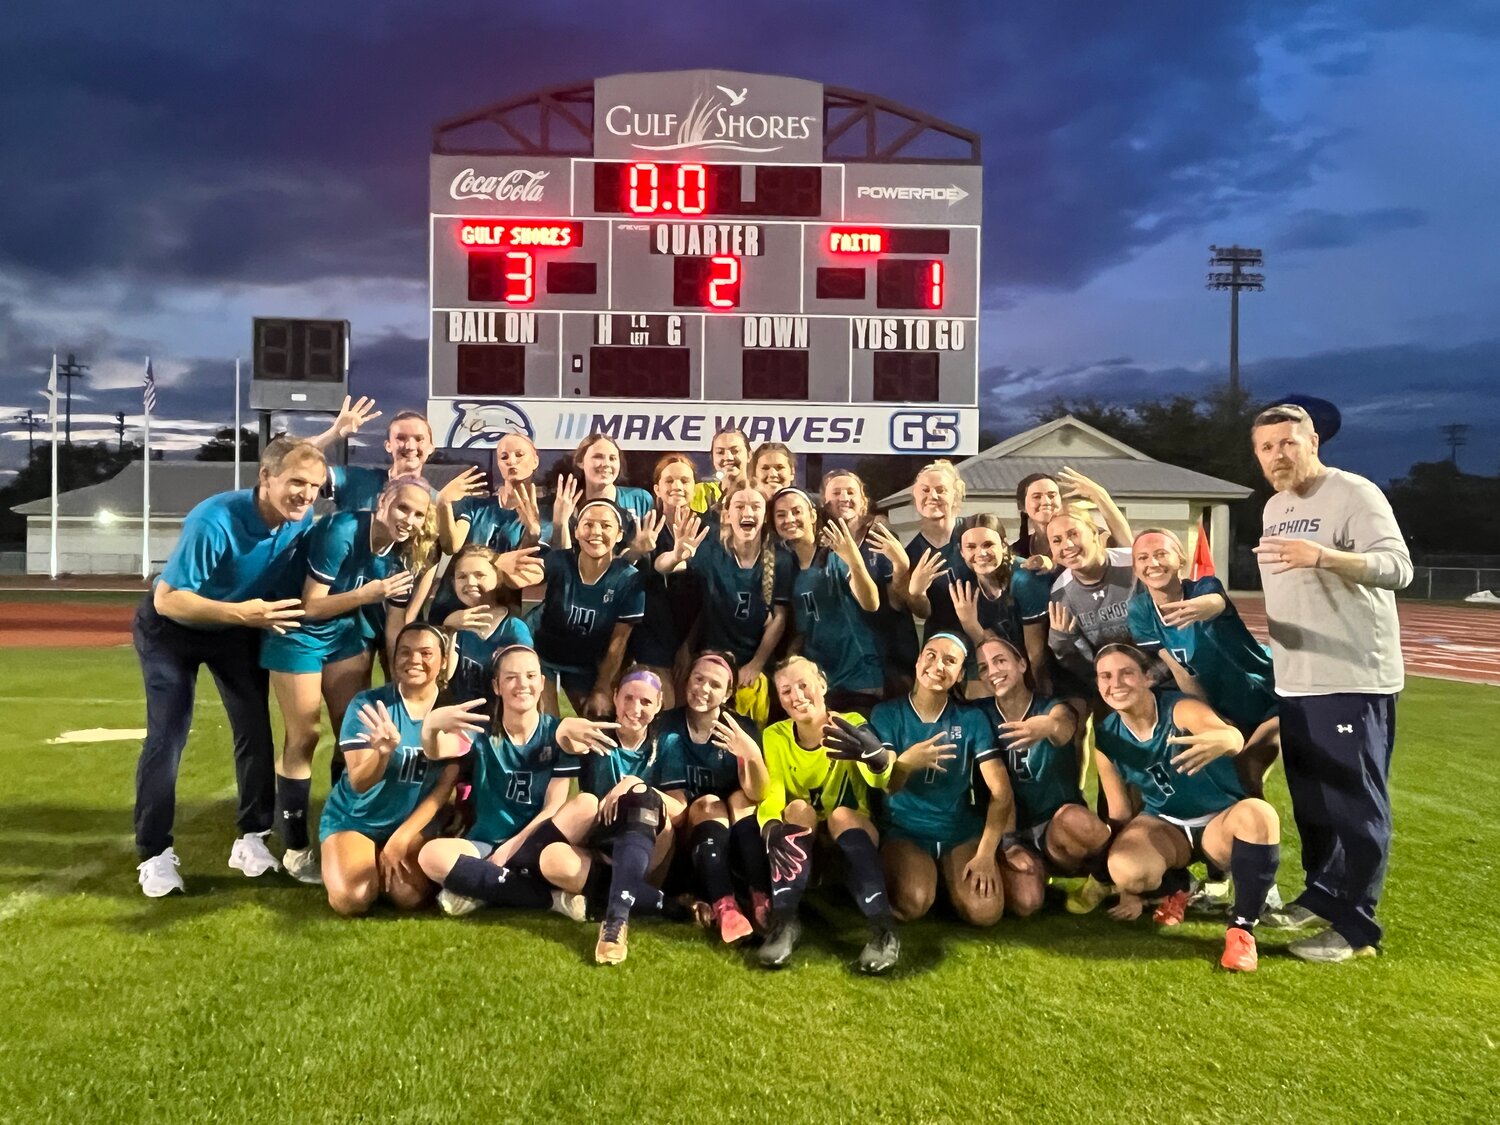 The Gulf Shores girls’ soccer team took down the Faith Academy Rams 3-1 at home in the AHSAA state quarterfinals to qualify for its first-ever semifinal this Friday in Huntsville. The Dolphins drew Marbury with a trip to the finals on the line.